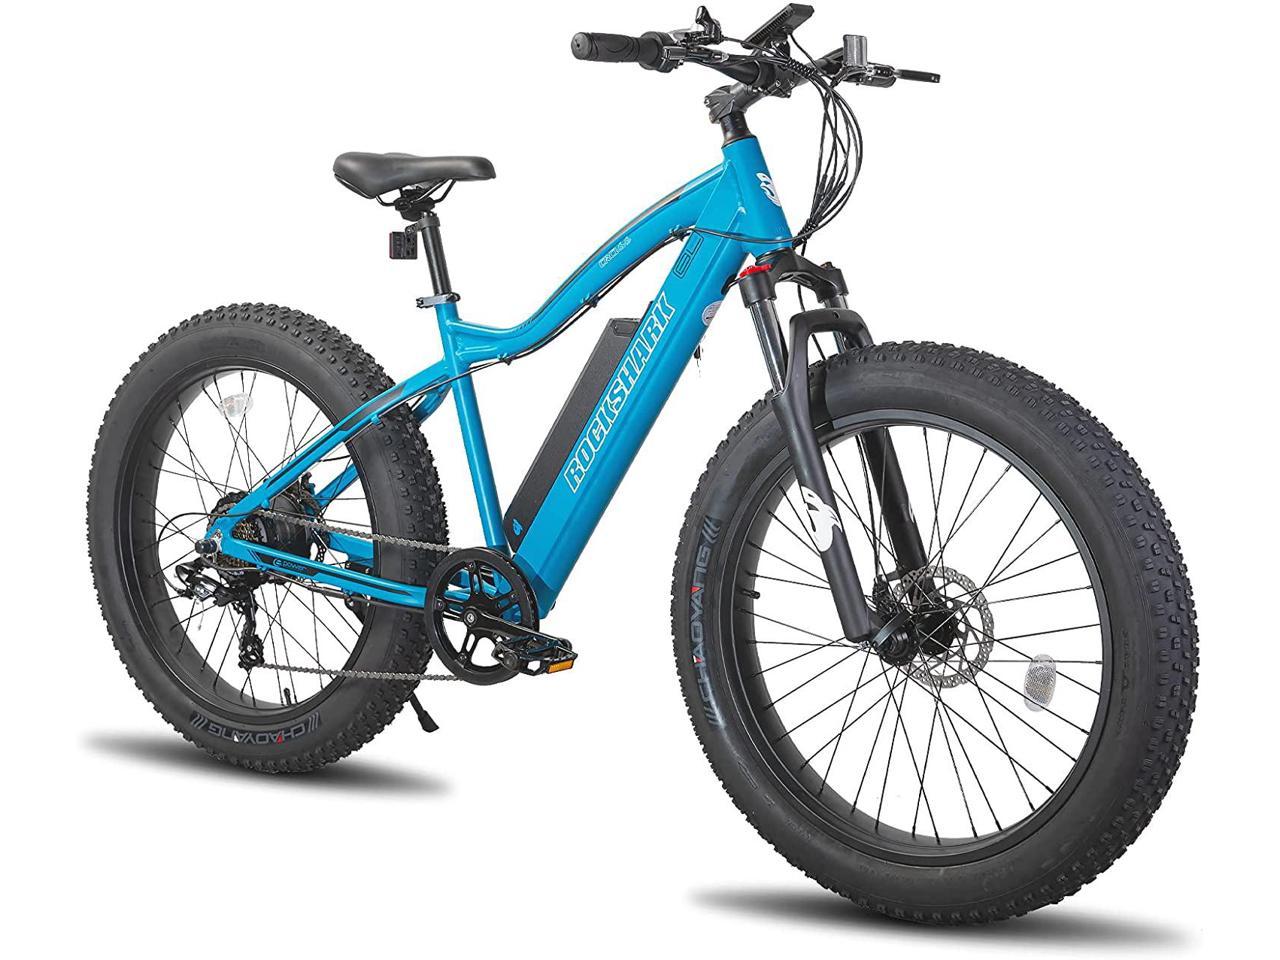 Ampr’Up Turbo SL Fat Tire Electric Bike with 7-Speed Shimano Professional Transmission System BAFANG 500W Brushless Geared Motor in-Frame Removable LG 48V 16AH Lithium-Ion Battery 